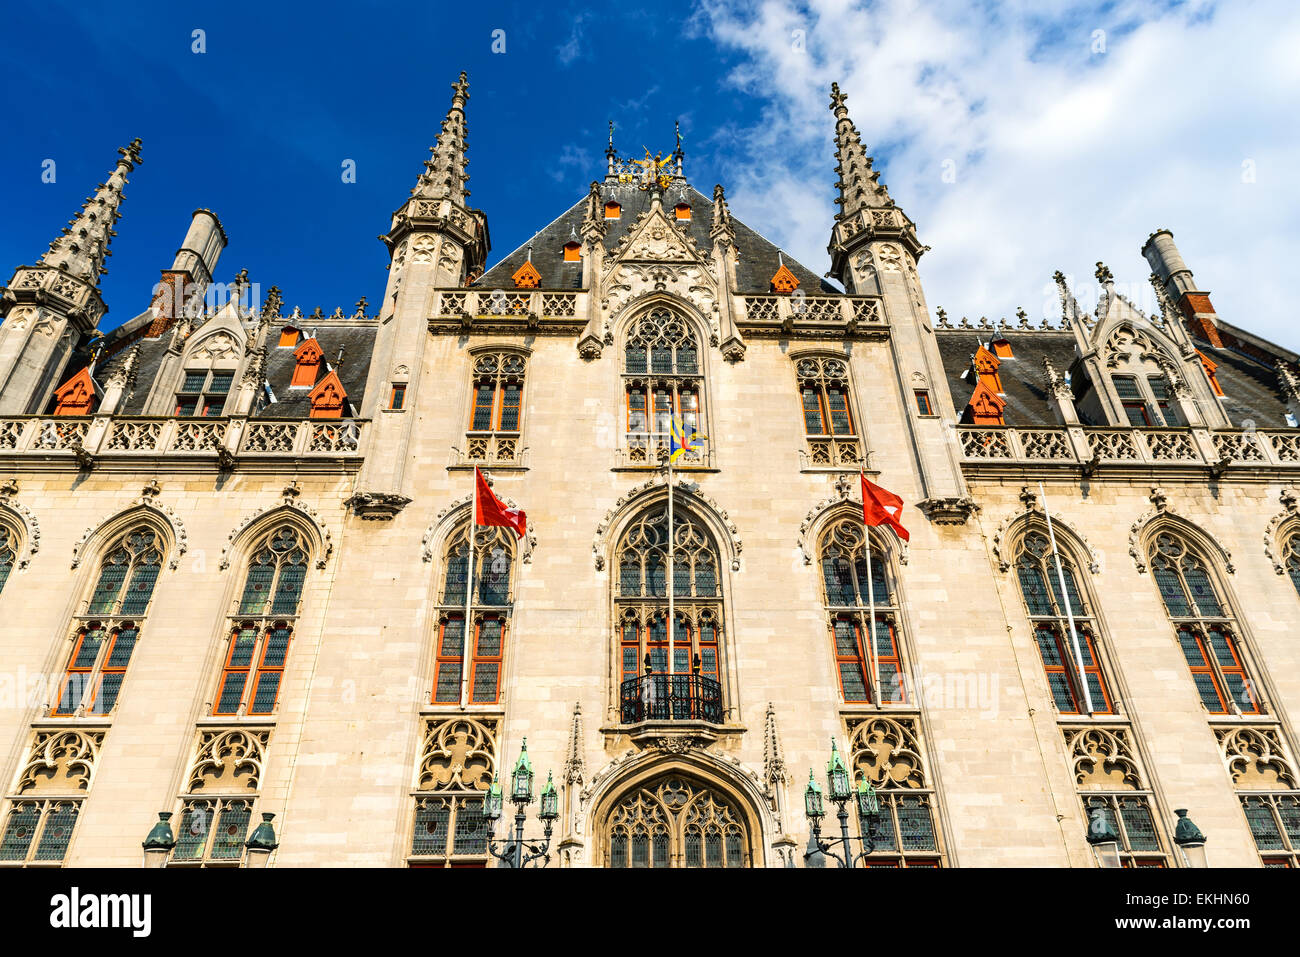 Provinciaal Hof built in 1284 neogothical building on the Grote Markt place in Bruges, Belgium. Stock Photo